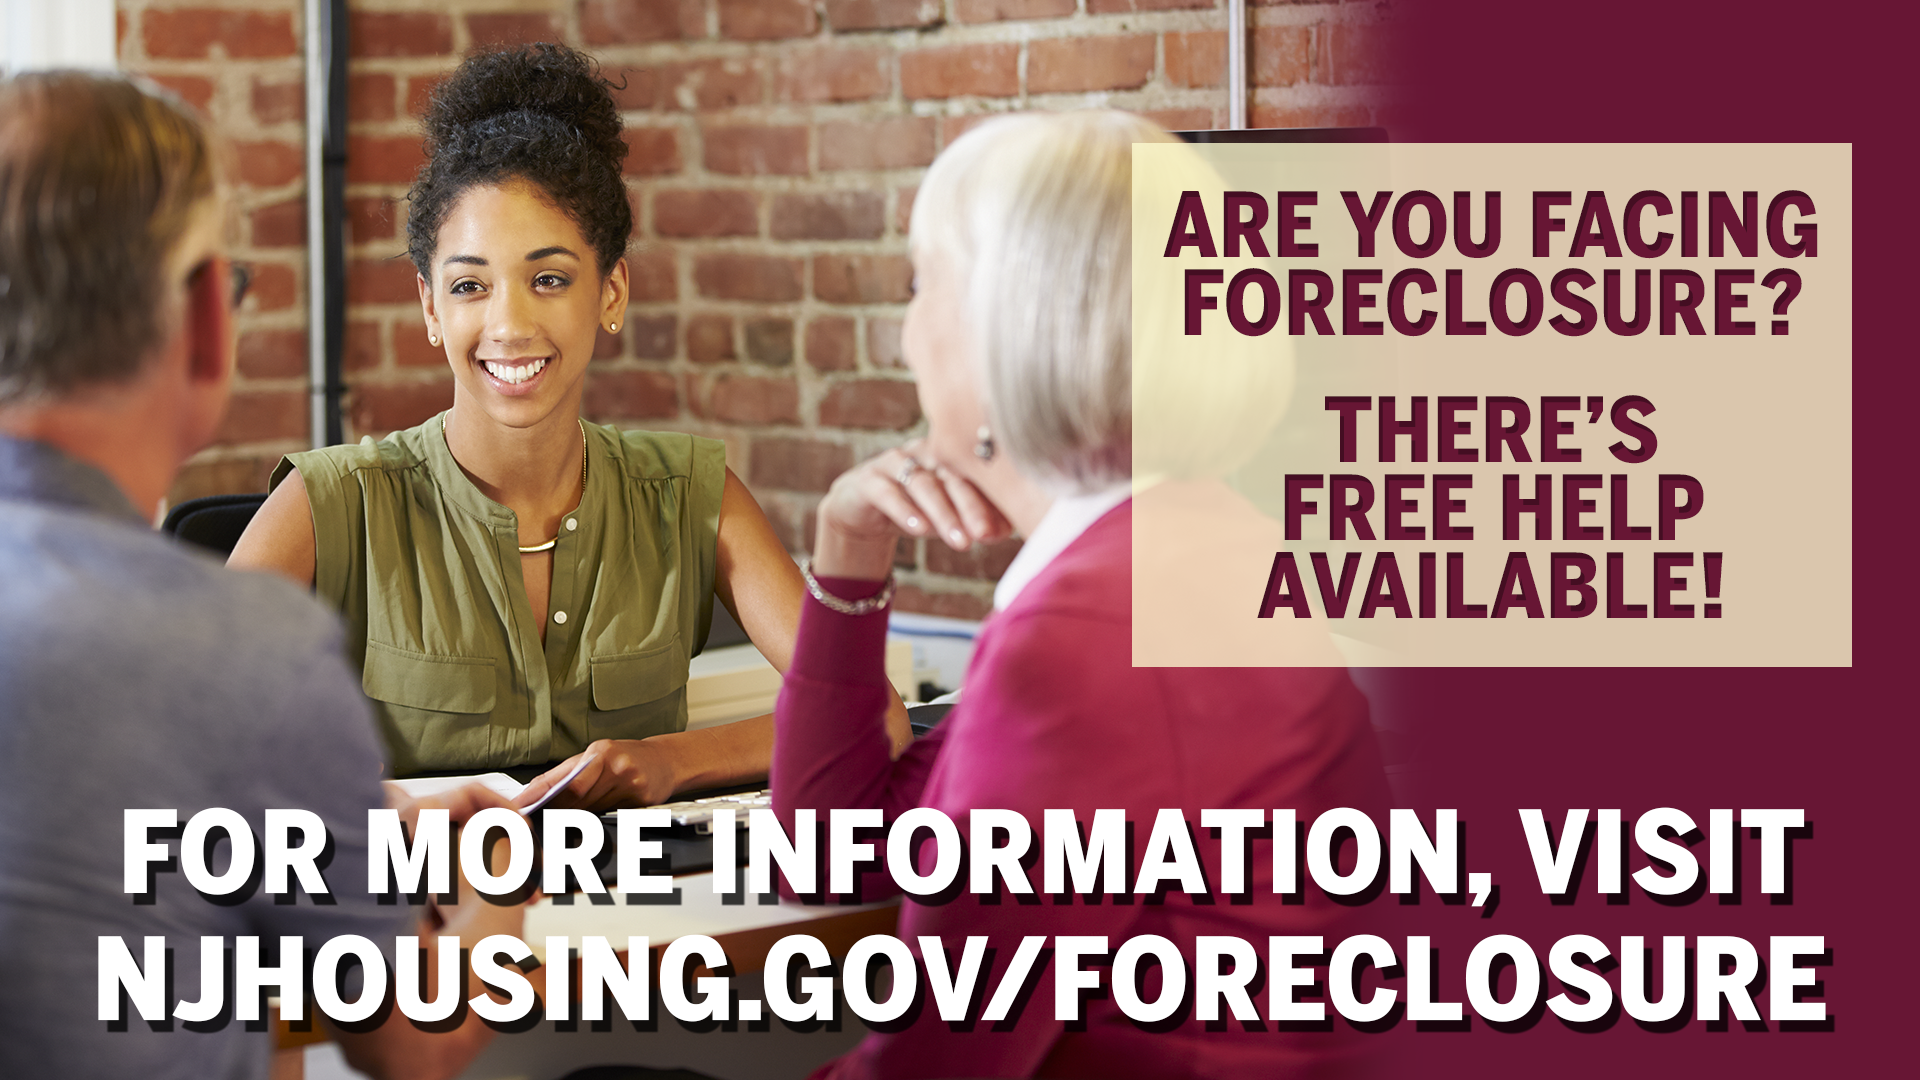 Are you facing foreclosure?  There's FREE Help Available!
					For more information, visit njhousing.gov/foreclosure